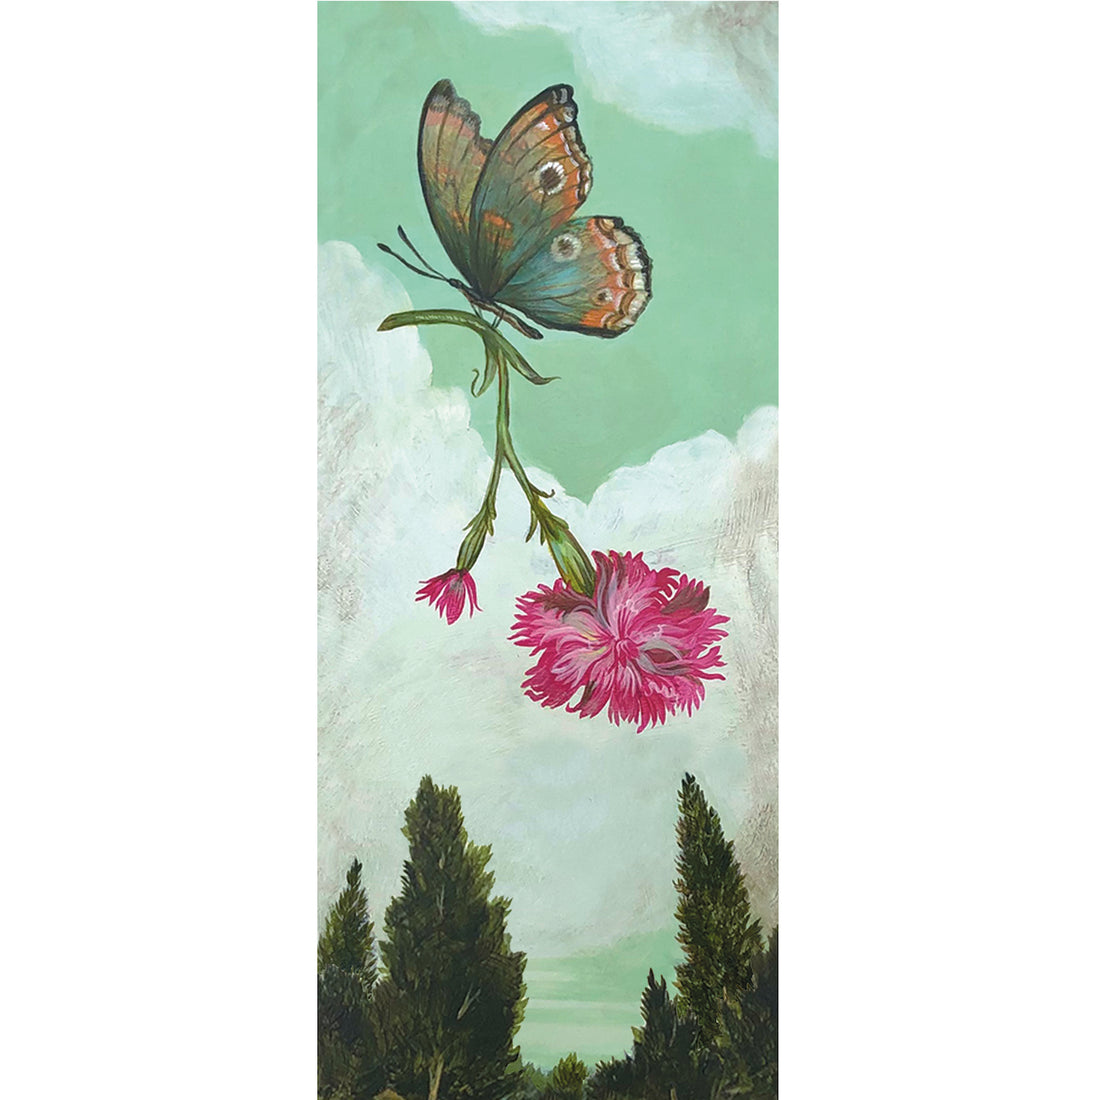 A whimsical illustration of a blue and orange butterfly flying through a cloudy teal sky carrying a fluffy pink flower by the stem over dark green trees.